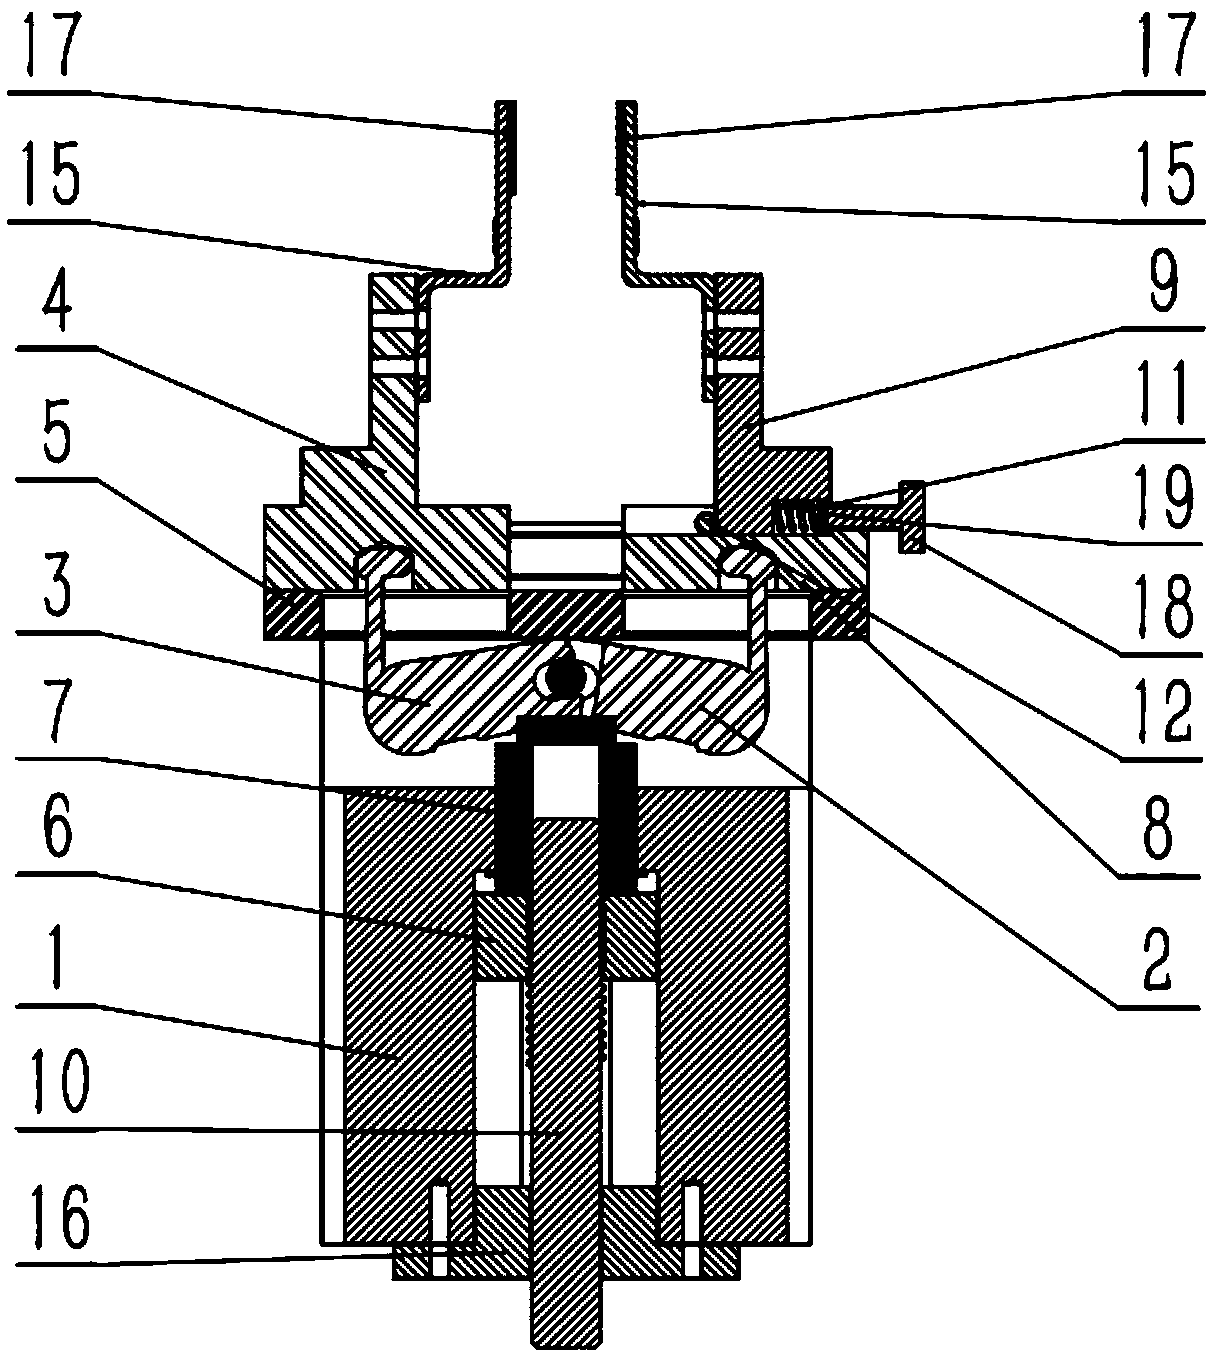 A parallel clamping device for clamping small parts